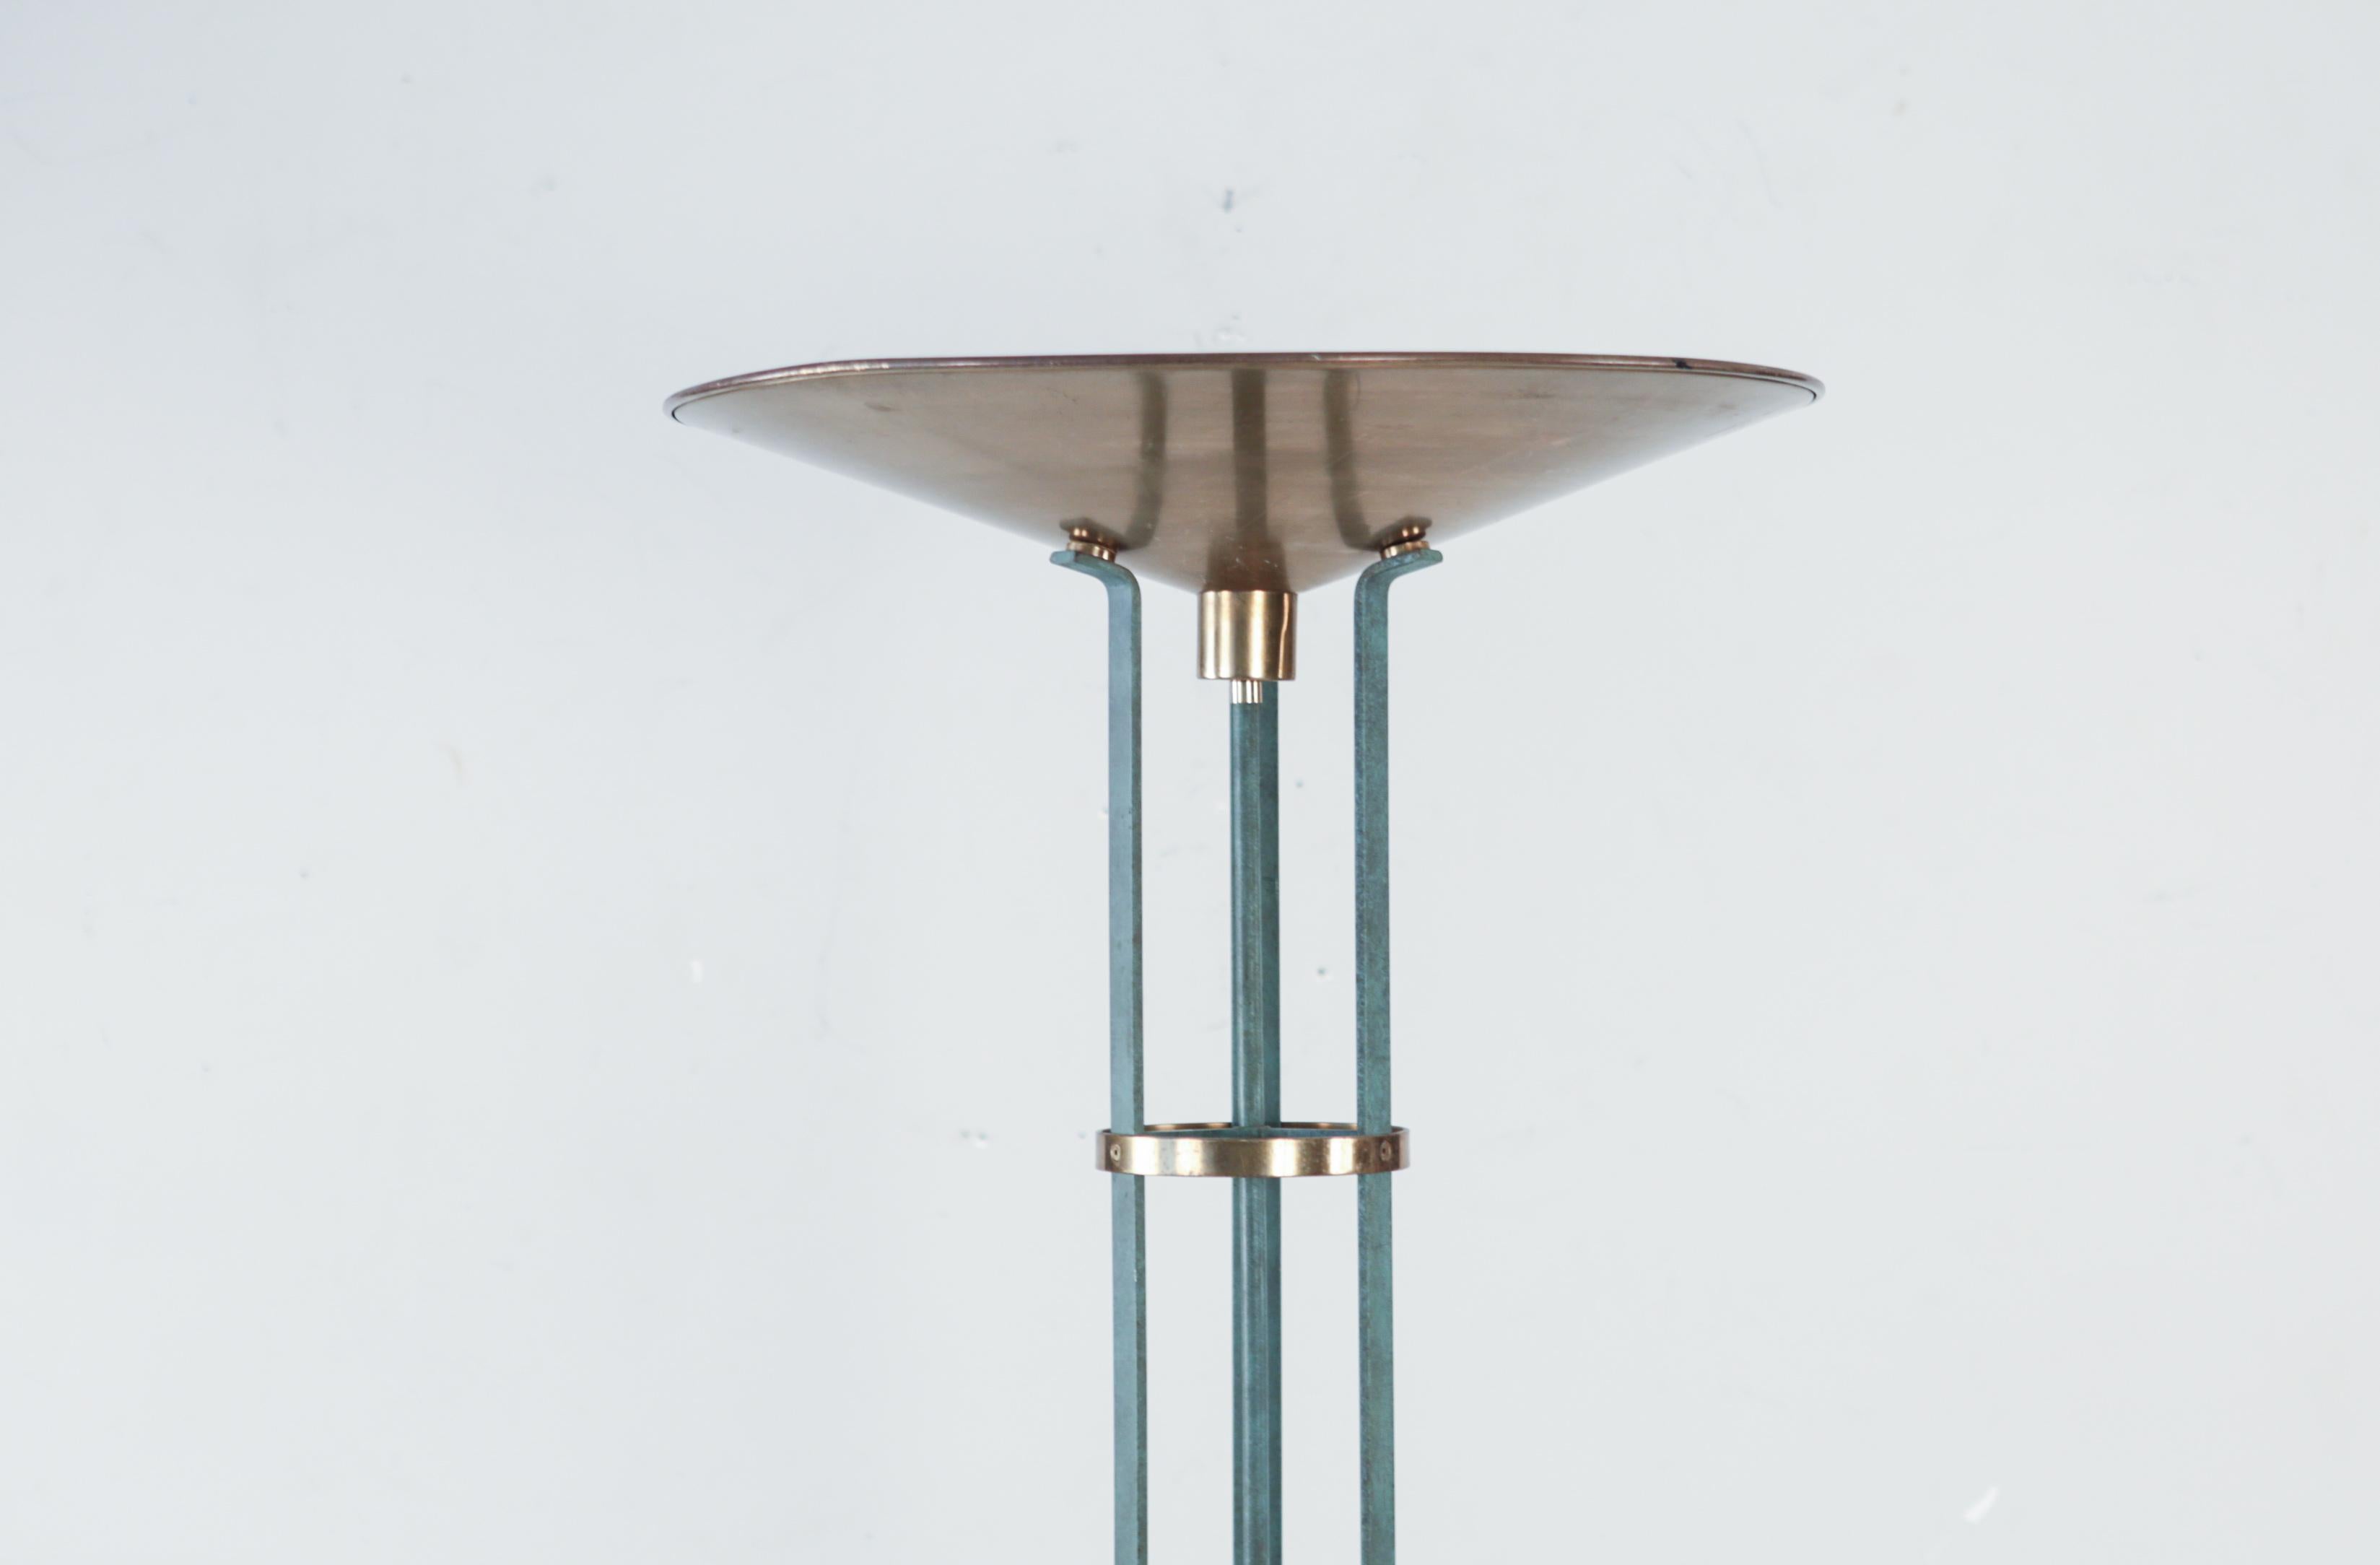 Evoke the drama and glory of the Olympic torch with this imposing torchiere-style floor lamp. Standing over six feet high, this sleek piece features faux-verdigris painted iron legs, polished brass accents, and a stunning brass bowl.